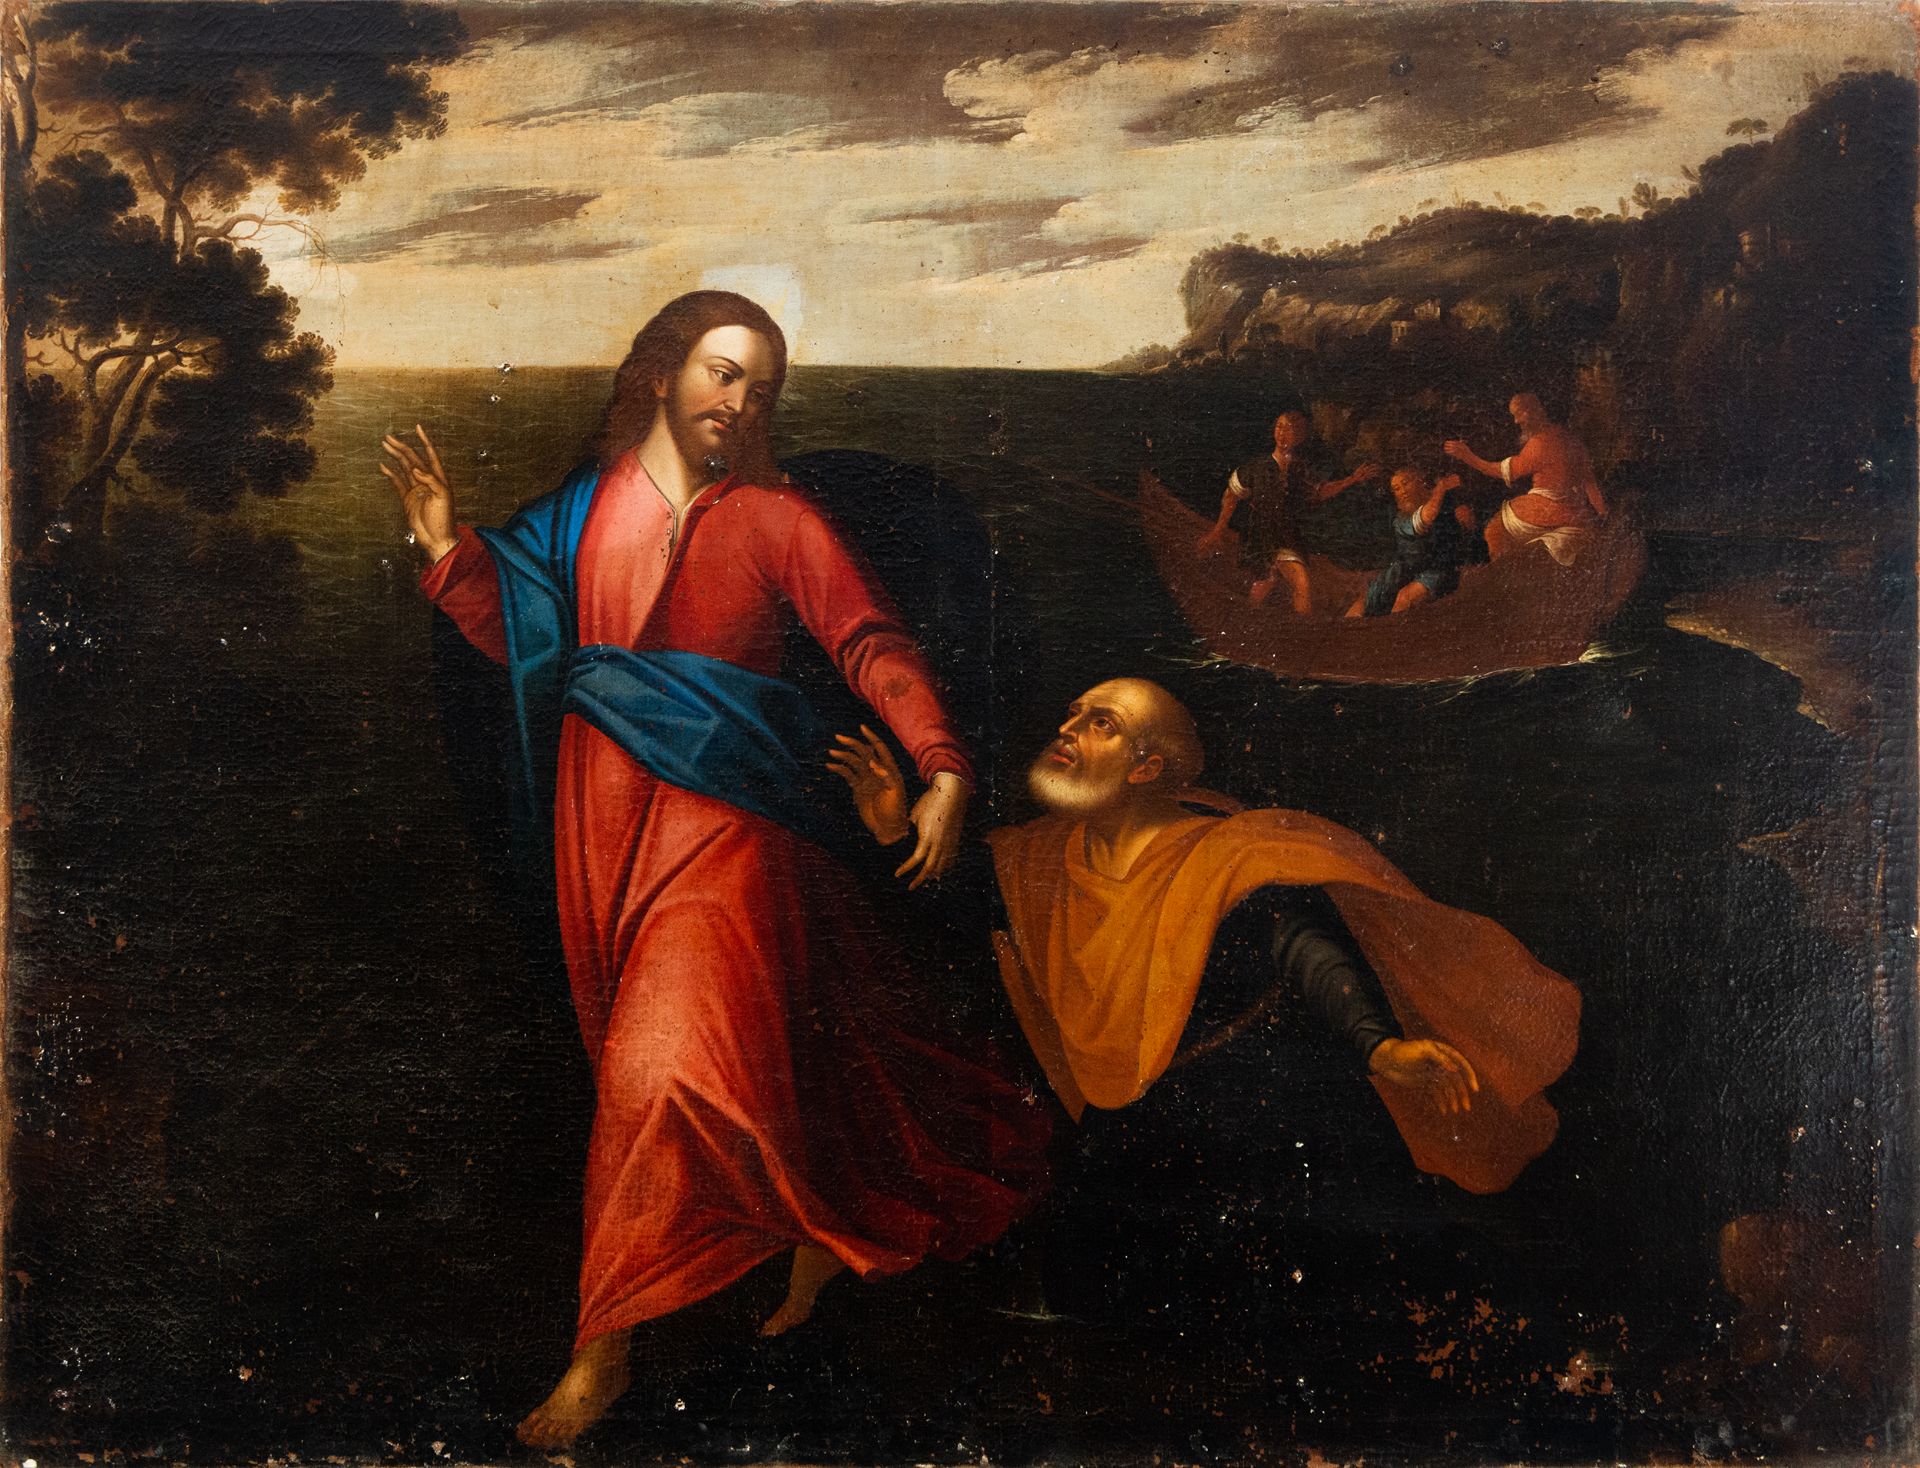 Jesus Saving Pedro from the Shipwreck, 17th century Viceroyalty colonial school